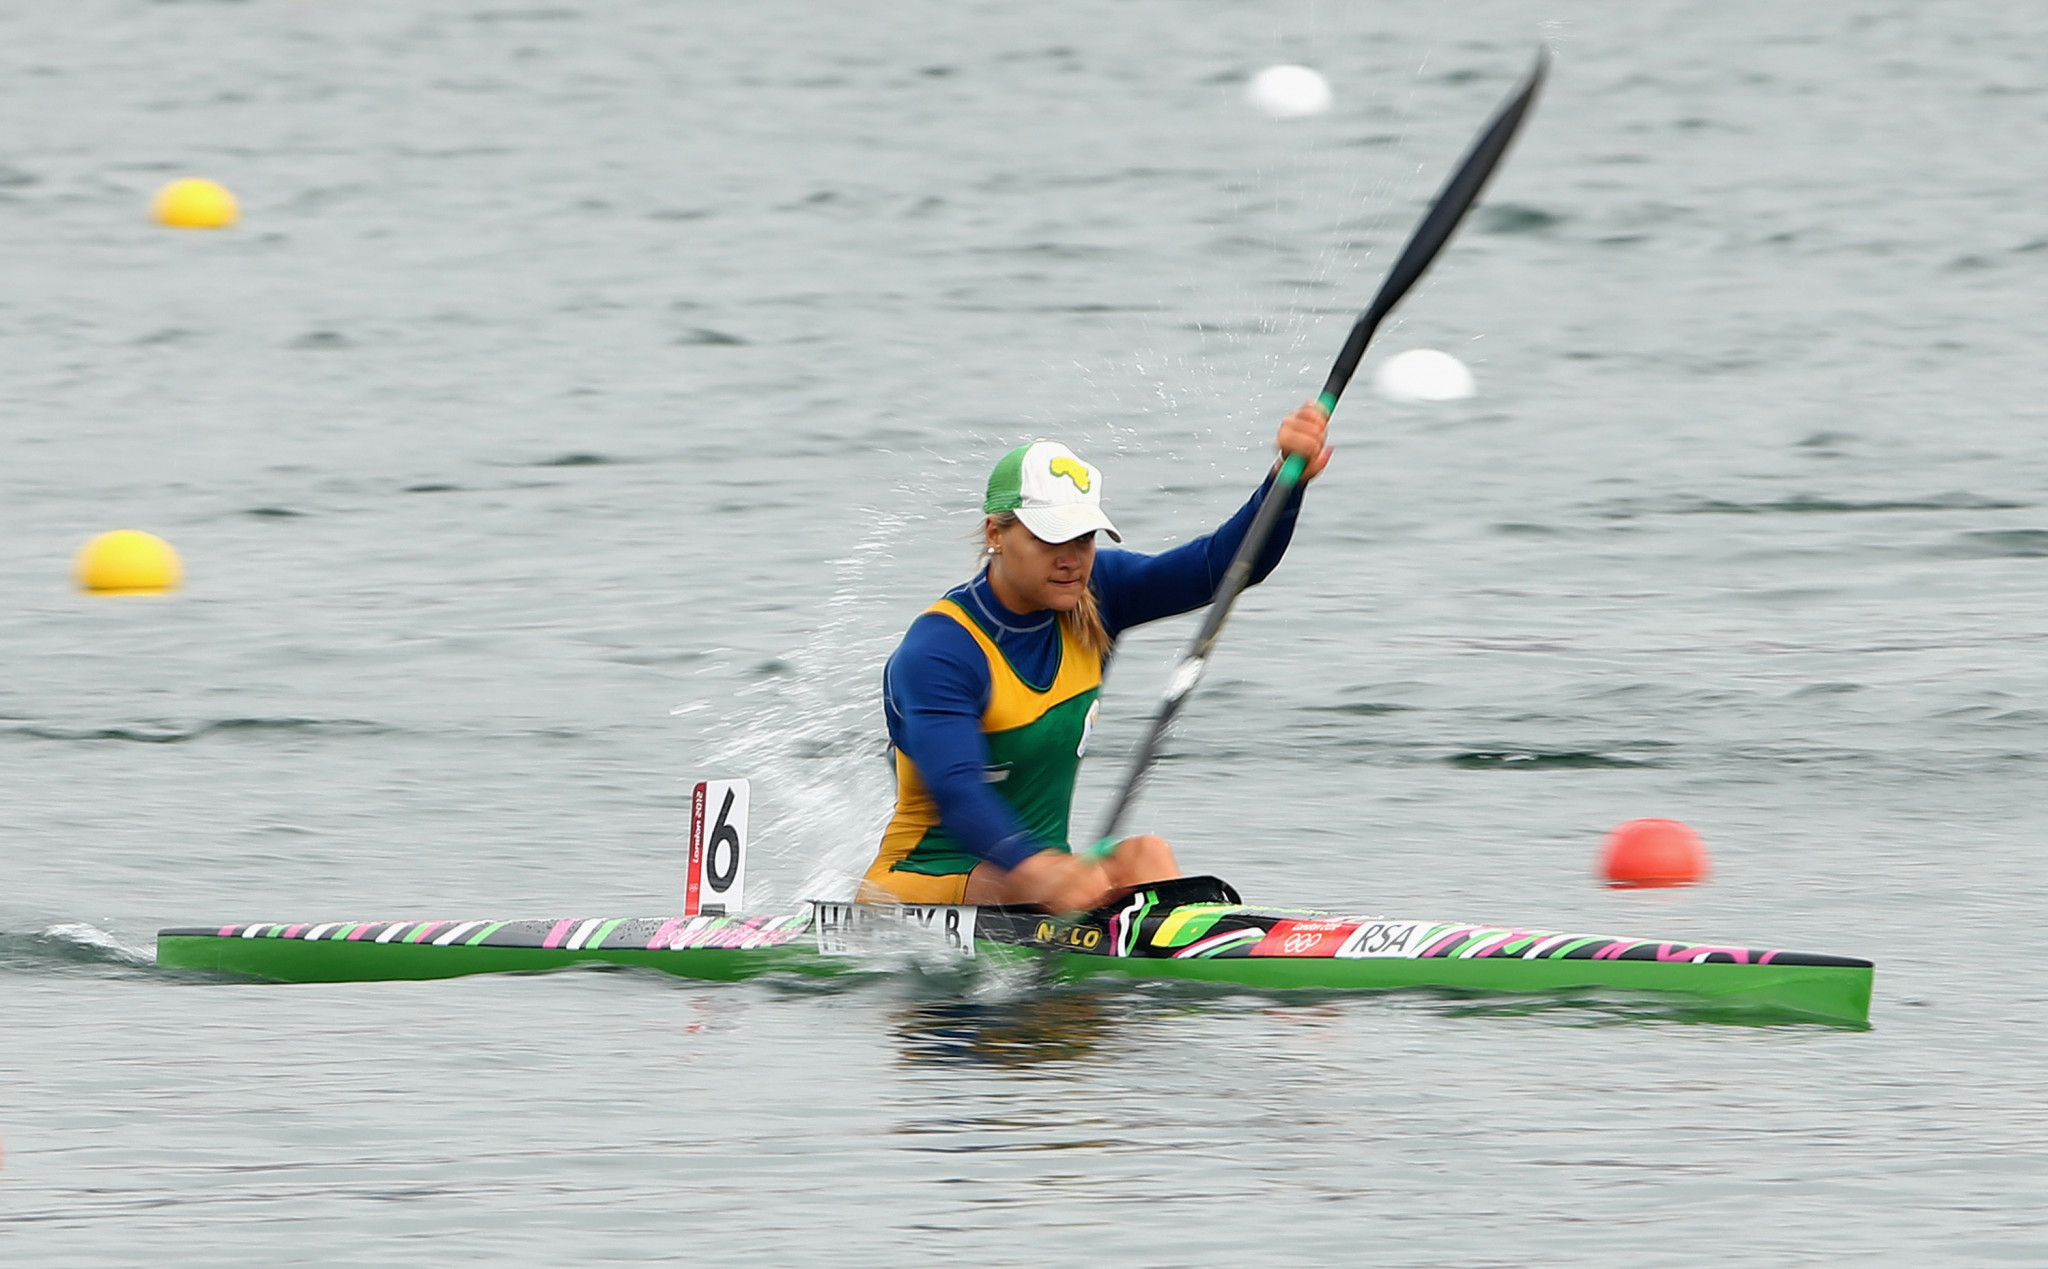 South Africa's Bridgitte Hartley was the last canoe medallist from the African continent at the Olympic Games with her bronze at London 2012 ©Getty Images